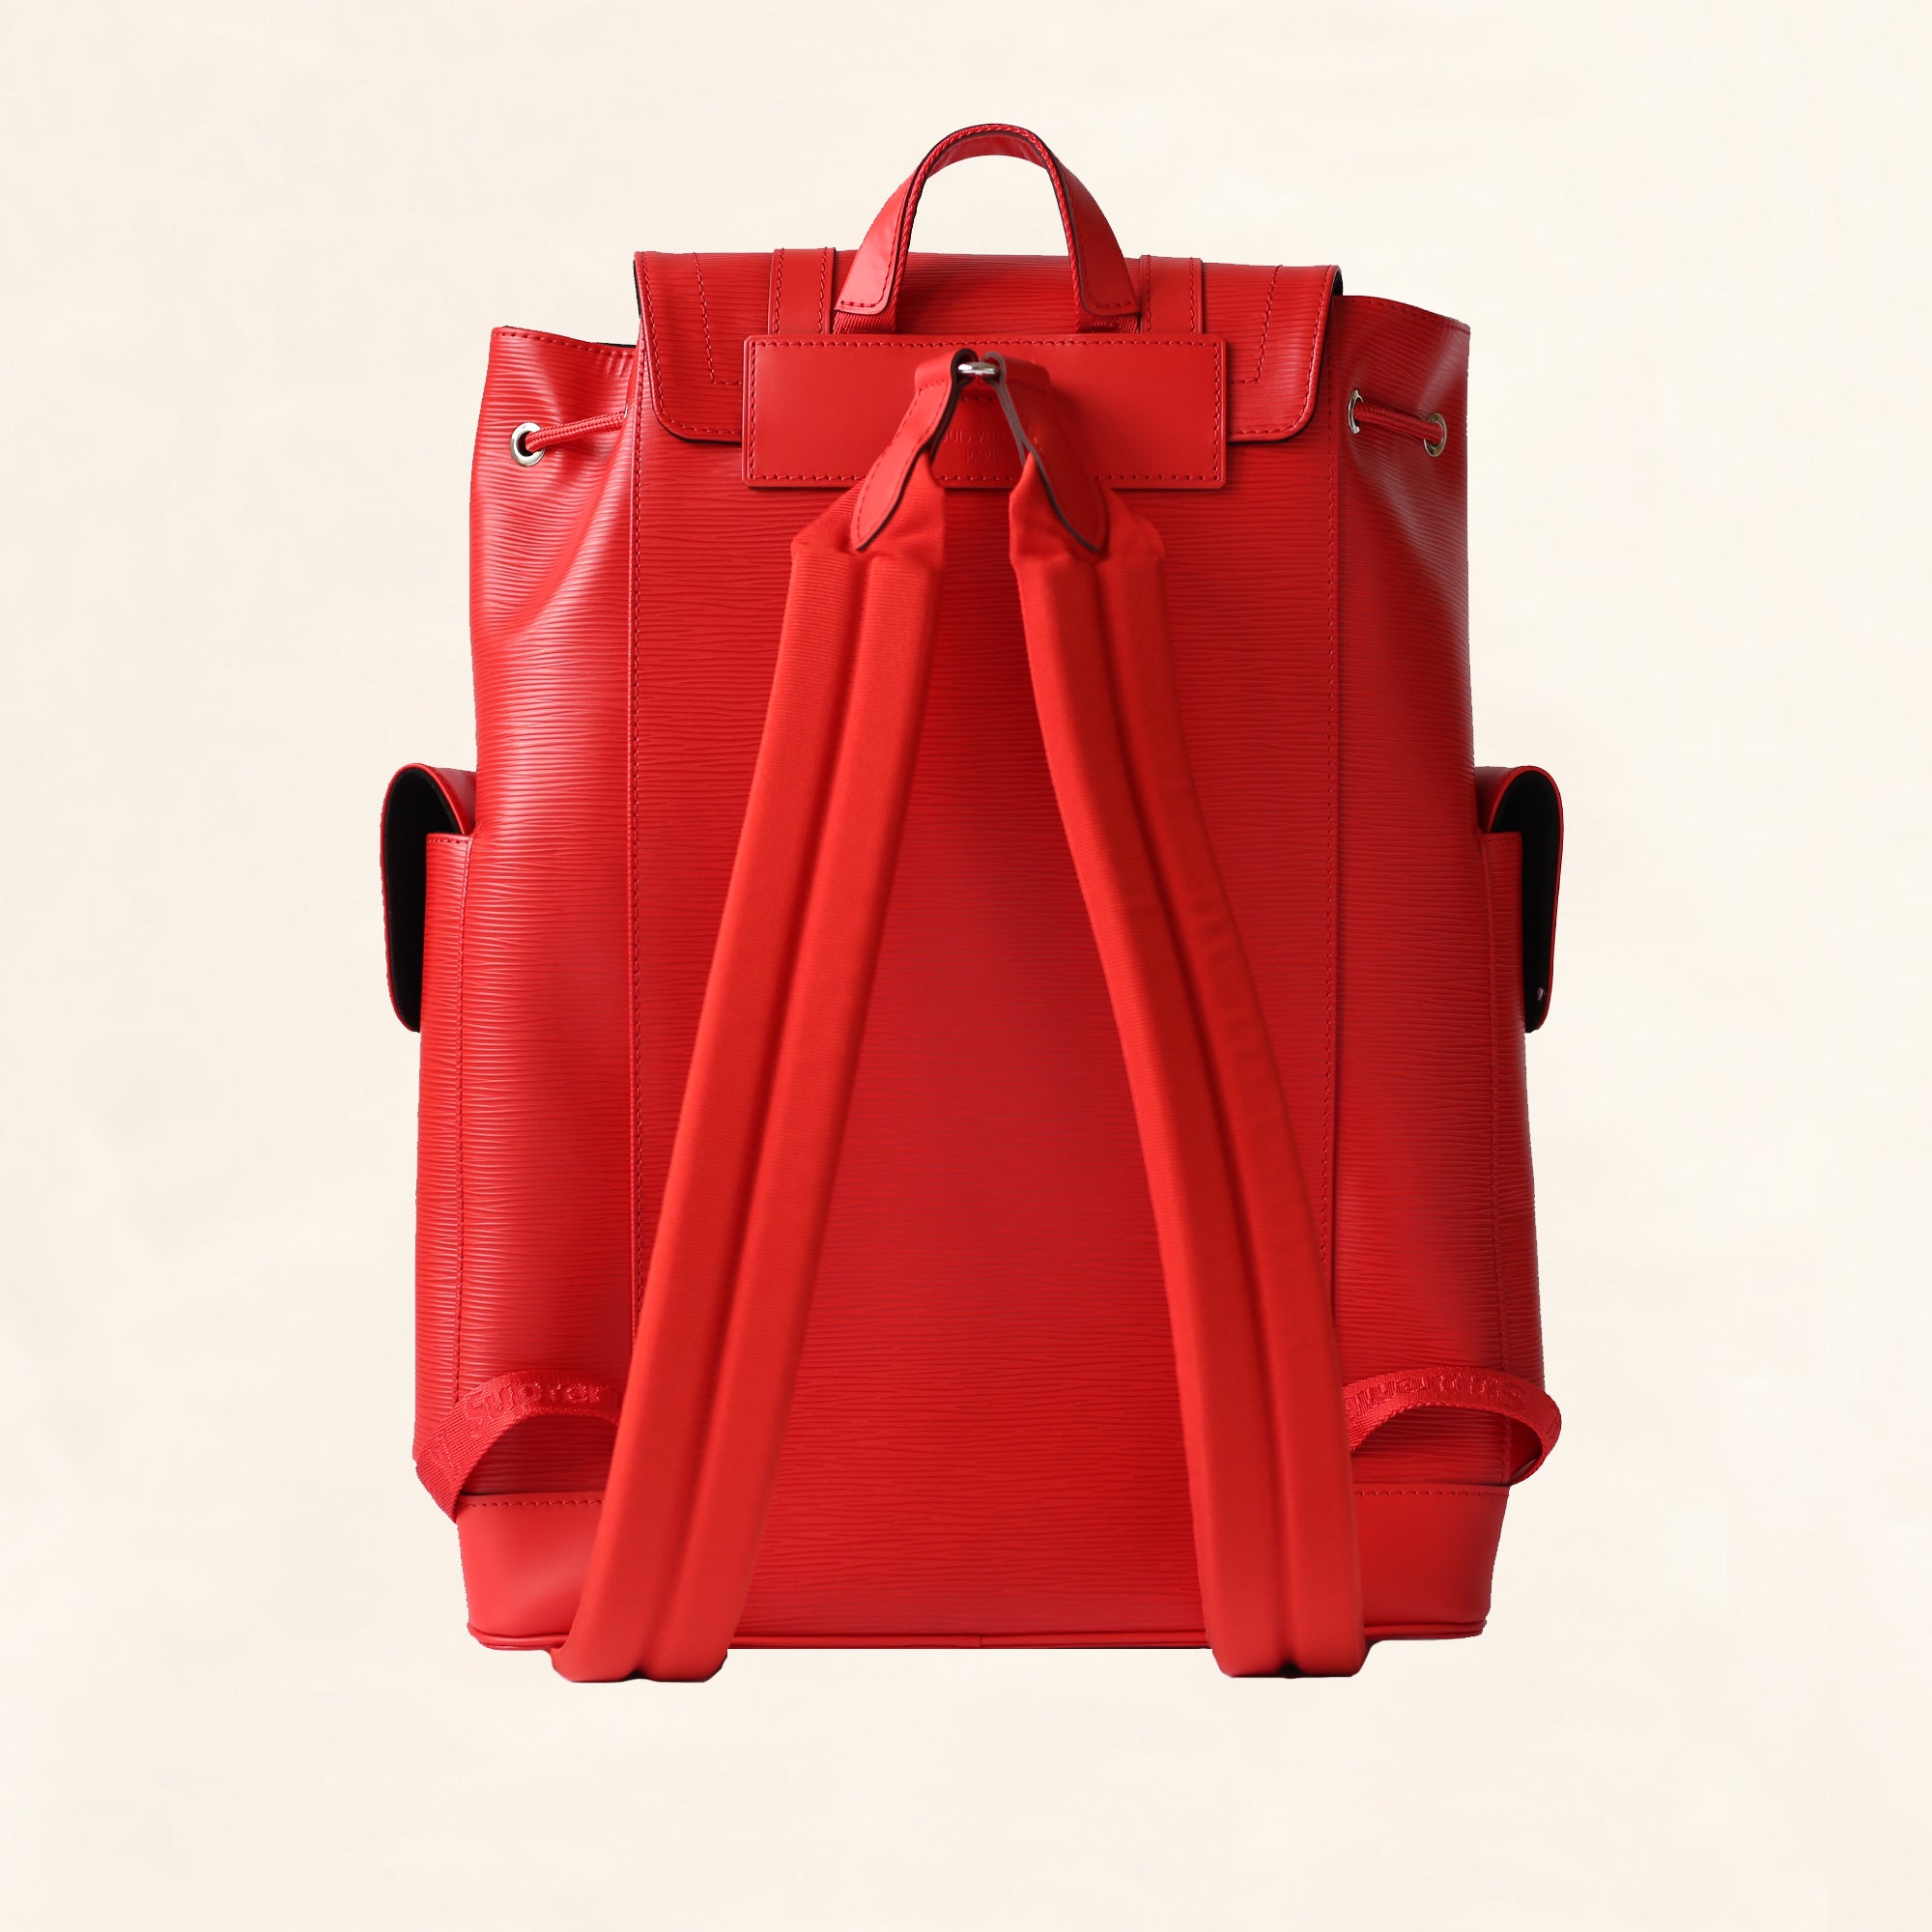 LOUIS VUITTON X SUPREME Epi Christopher Backpack PM Red 298147